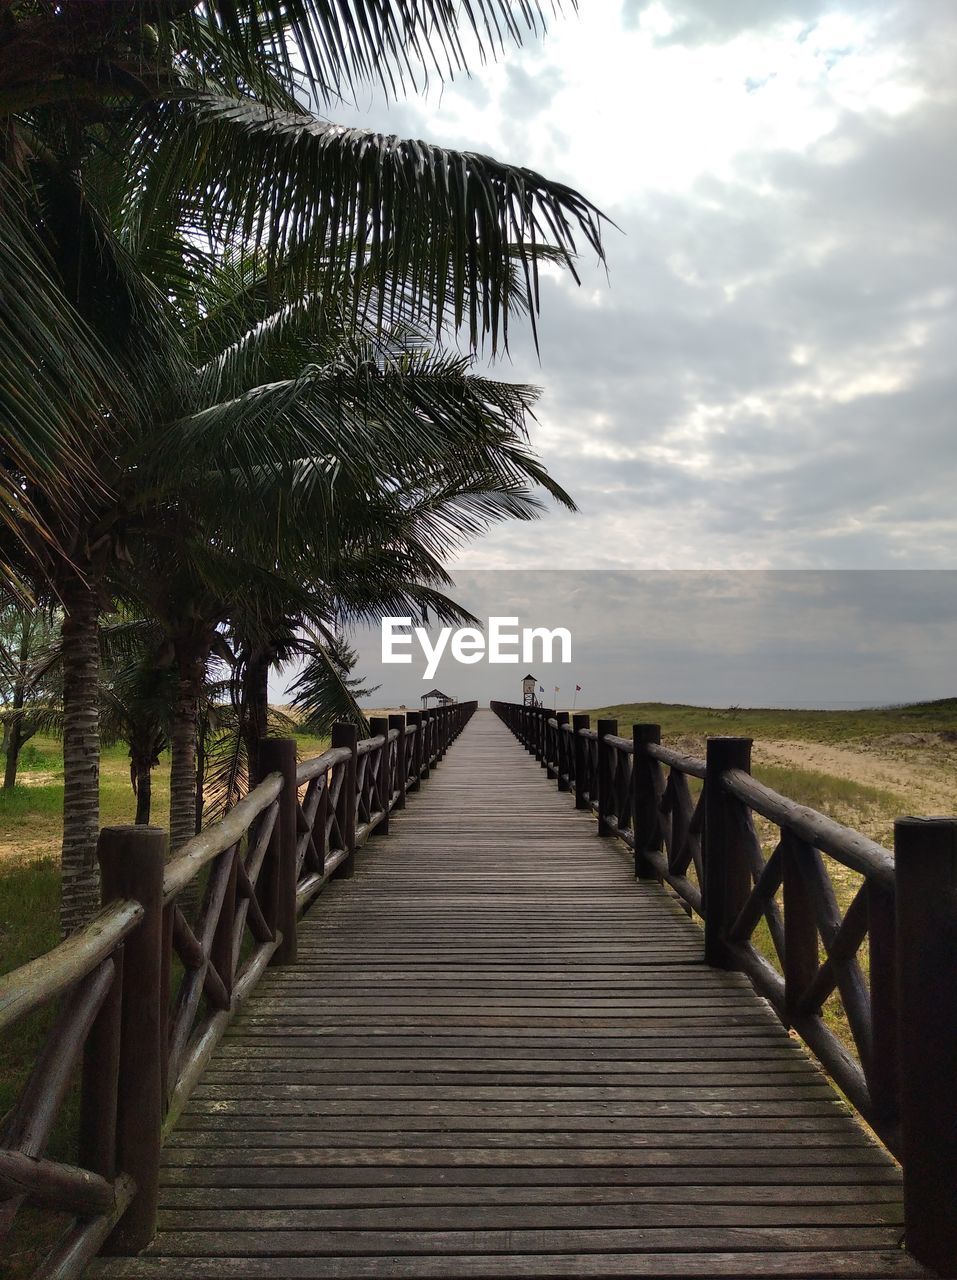 View of wooden boardwalk leading towards palm trees